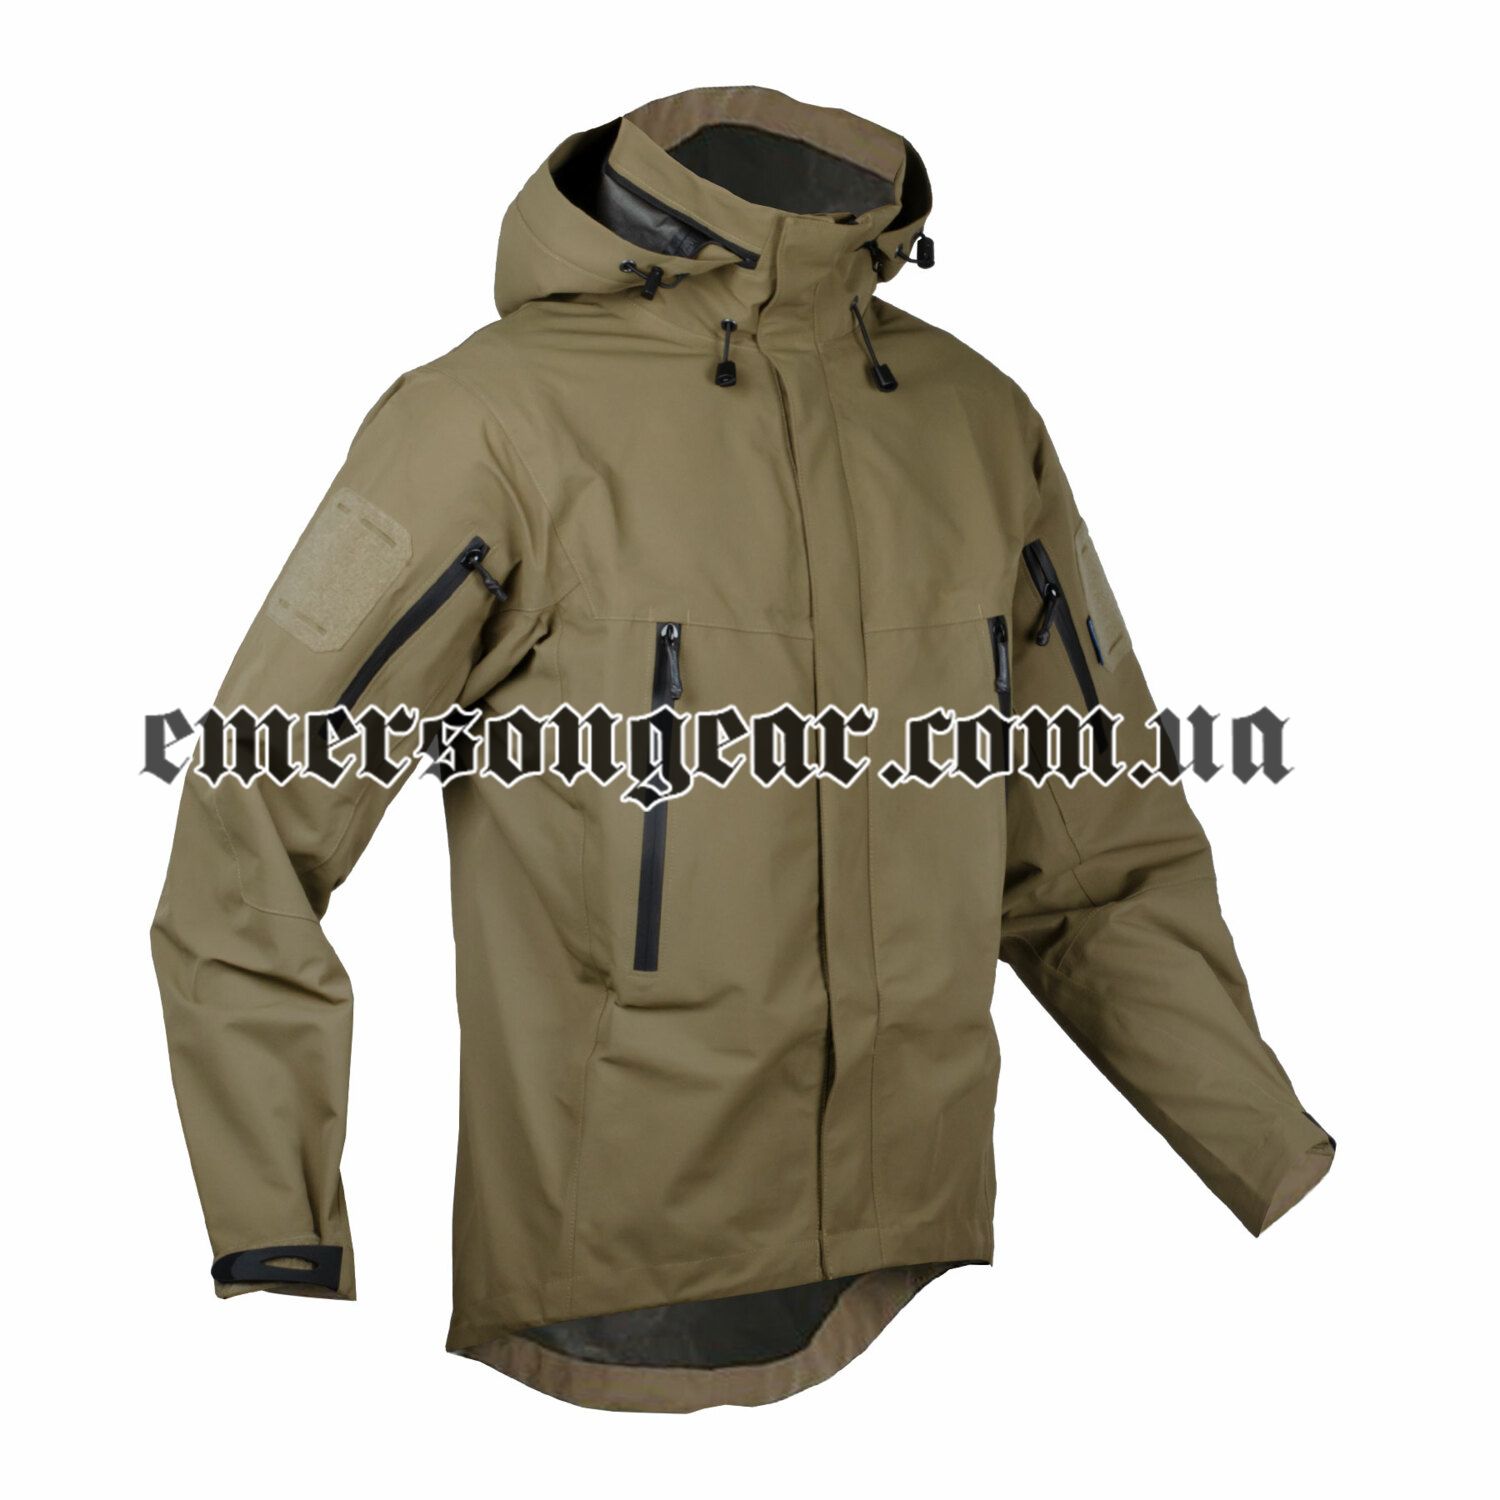 Buy Emerson Gear tactical clothing with delivery throughout Ukraine